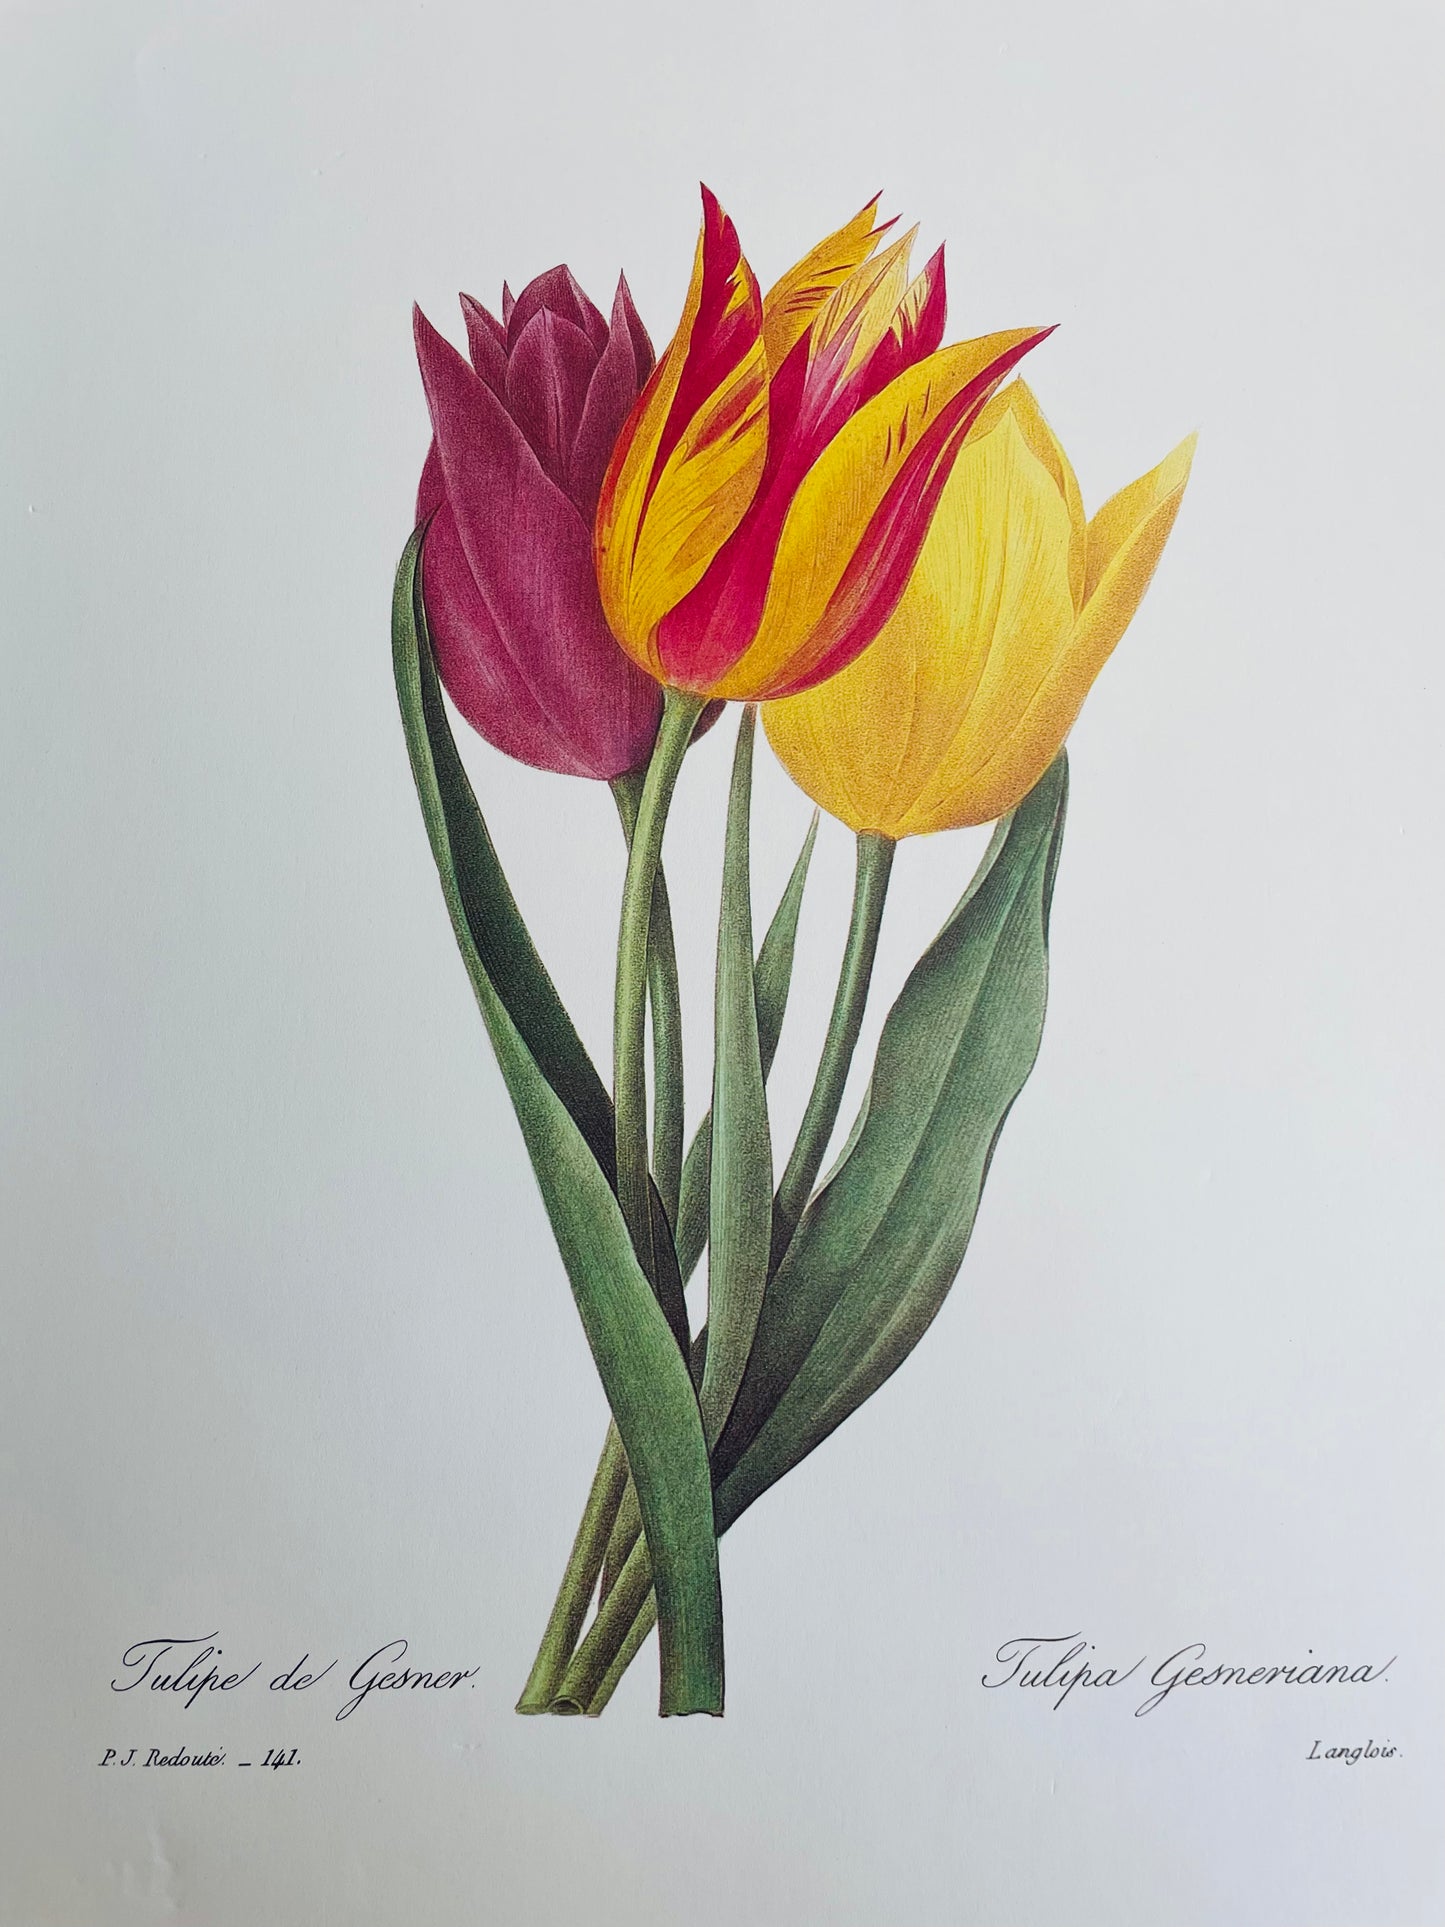 The Most Beautiful Flowers by Pierre Joseph Redoute Plate Reproduction Print - Garden Tulips